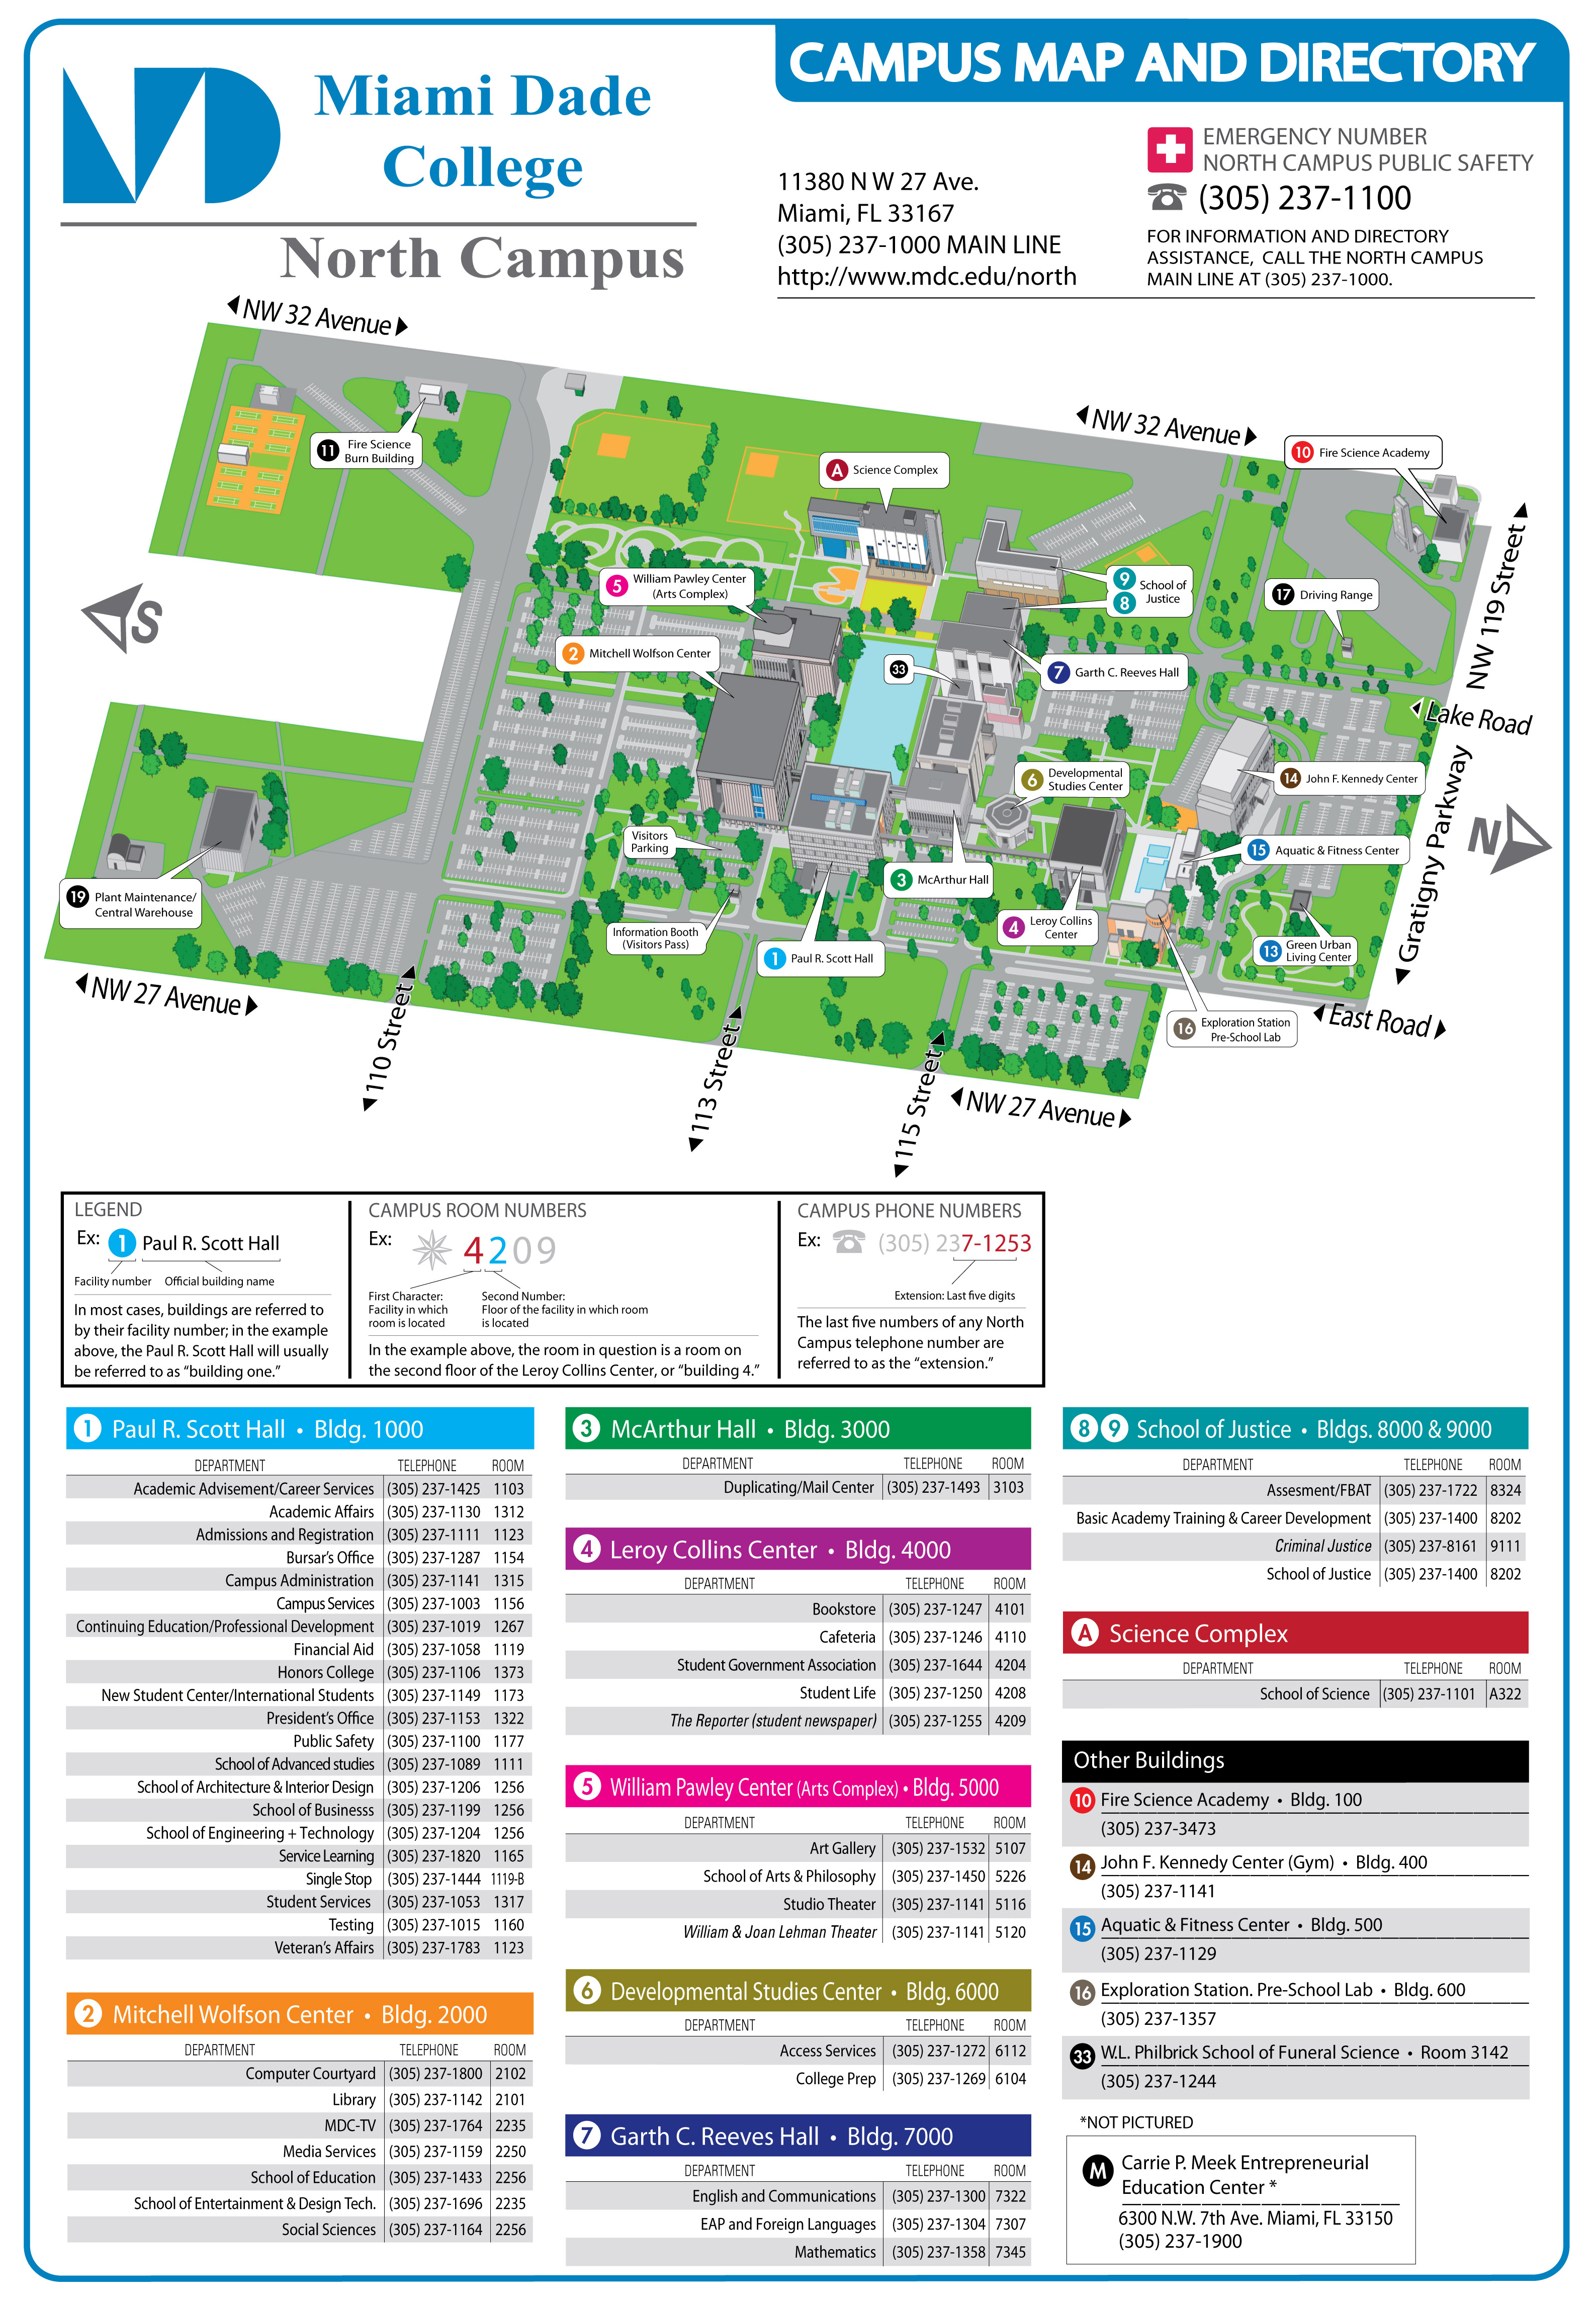 miami dade college map Campus Map Directions North Campus Miami Dade College miami dade college map